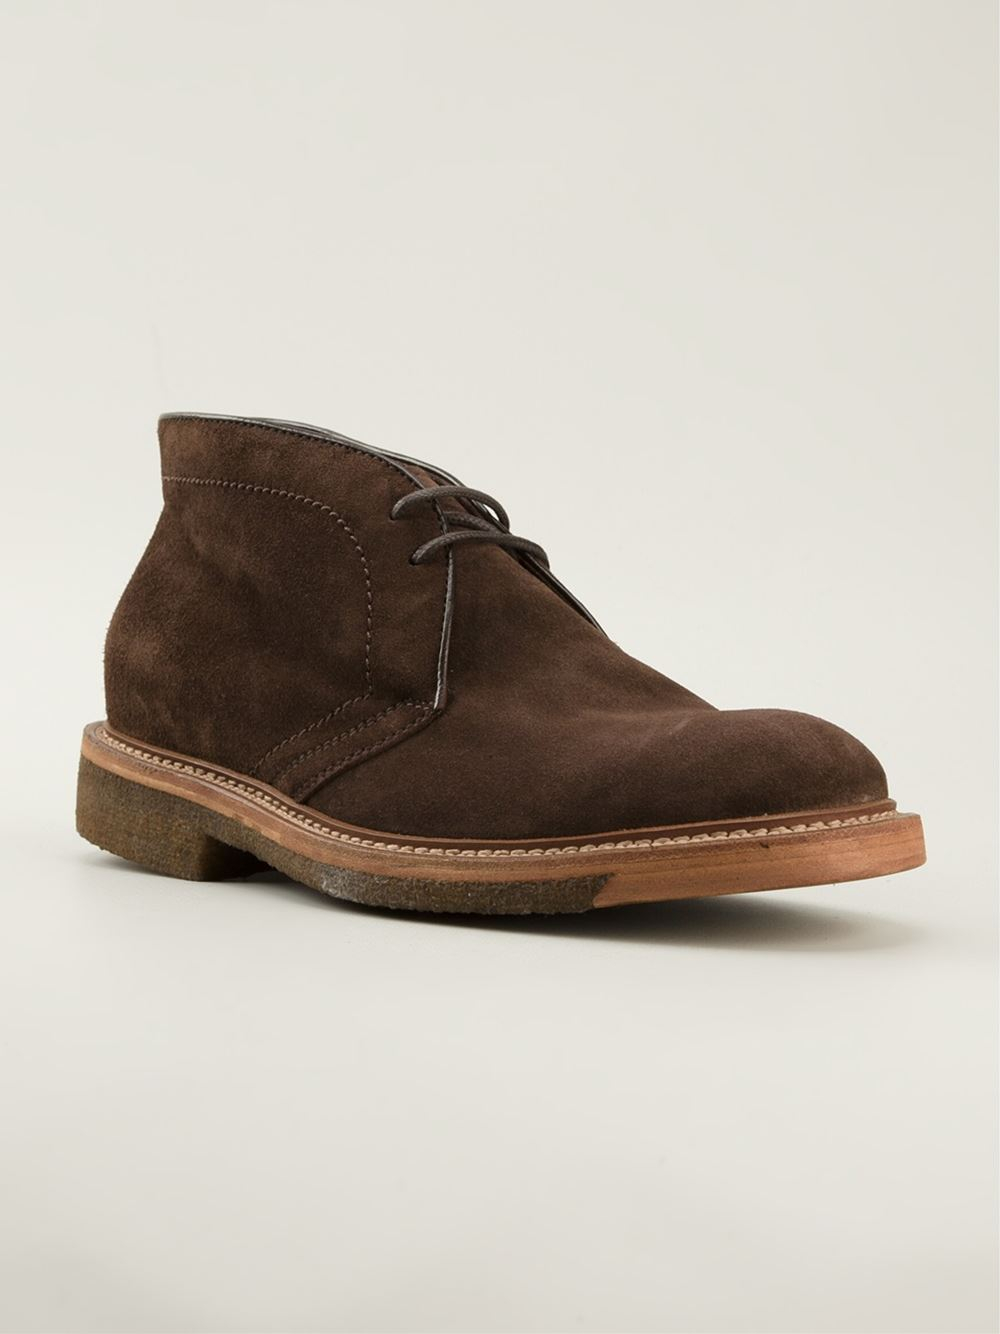 Henderson baracco Classic Desert Boots in Brown for Men | Lyst